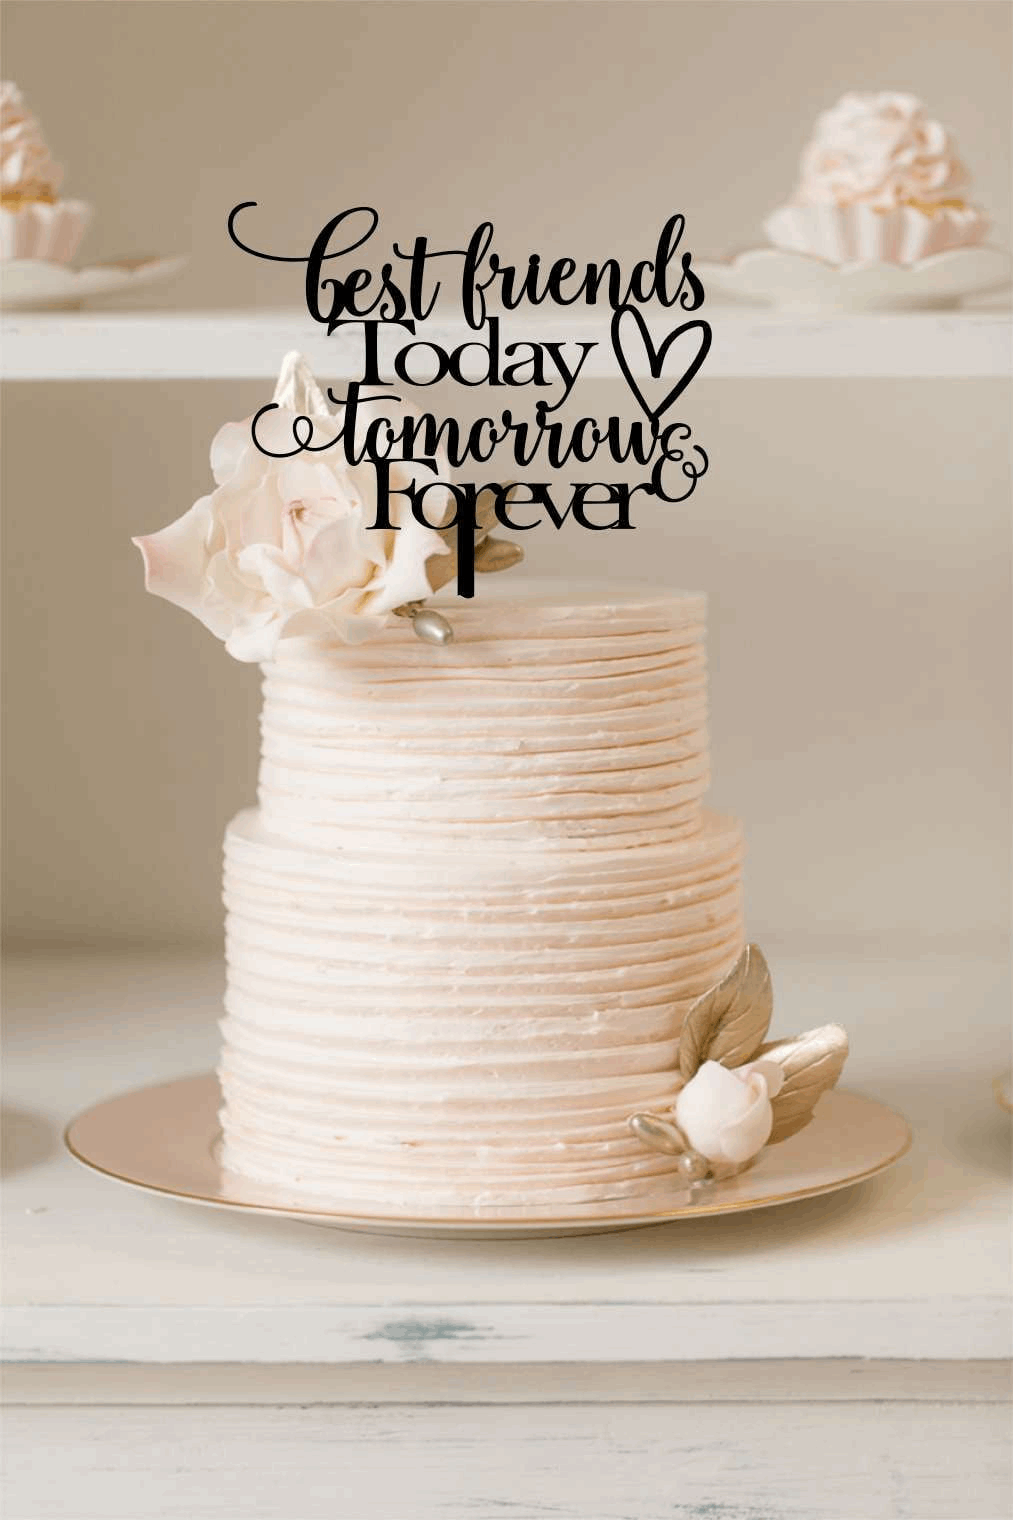 Friends Forever Mobile Wallpaper | Cool birthday cakes, Funny birthday cakes,  Happy birthday wishes images